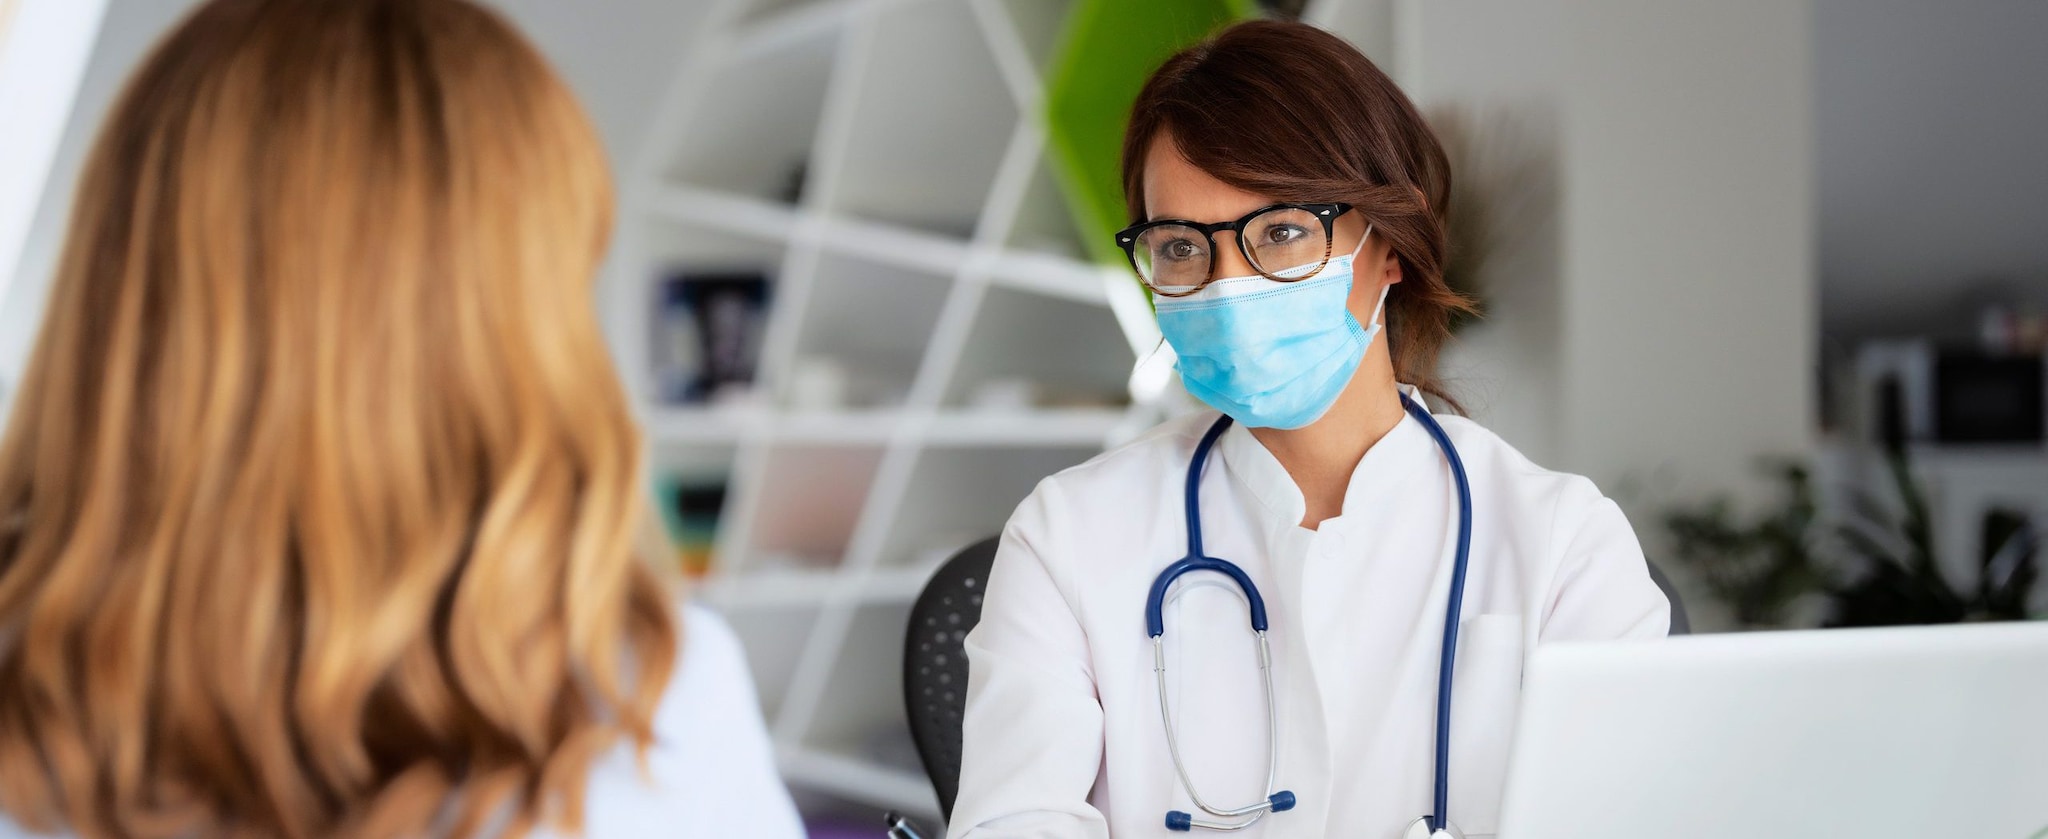 Doctor Wearing Face Mask While Listening To The Patient